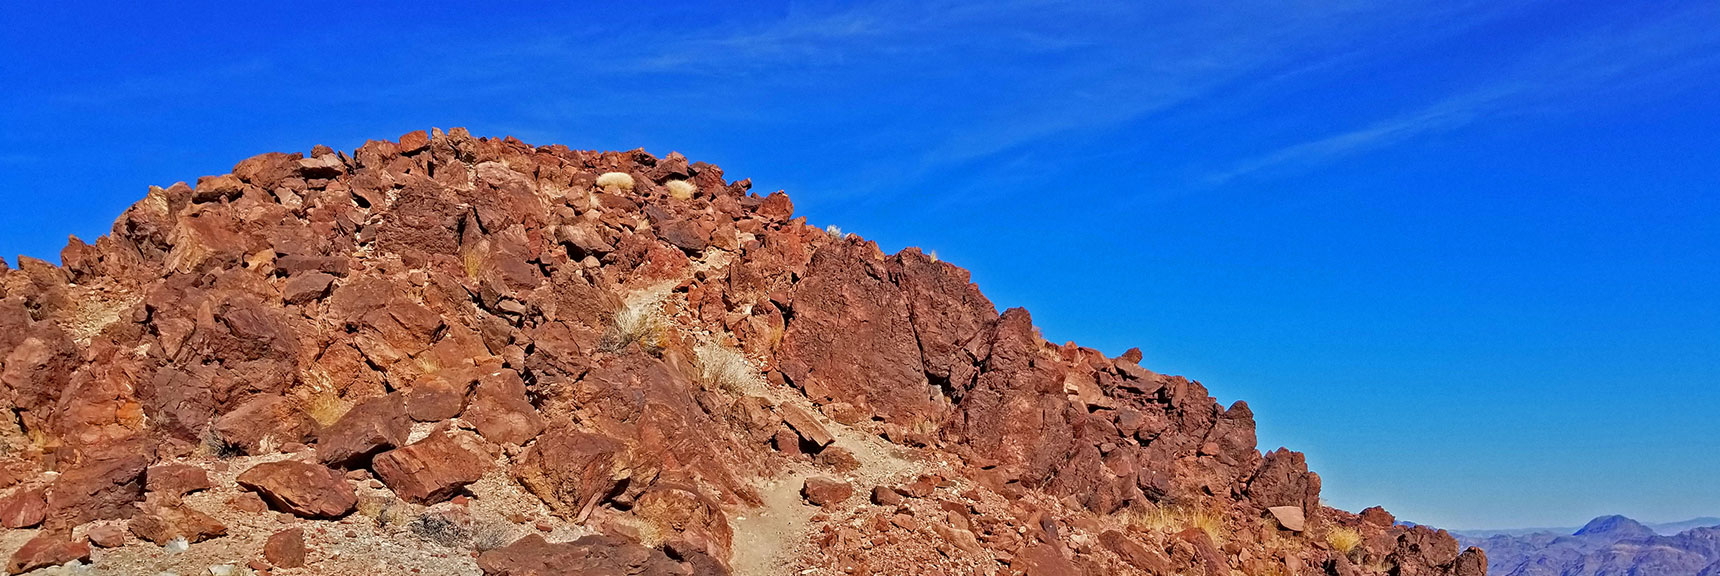 Navigating Boulders on the Summit Ridge of Mt. Perry Toward the First False Summit | Dante's View to Mt. Perry | Death Valley National Park, CA